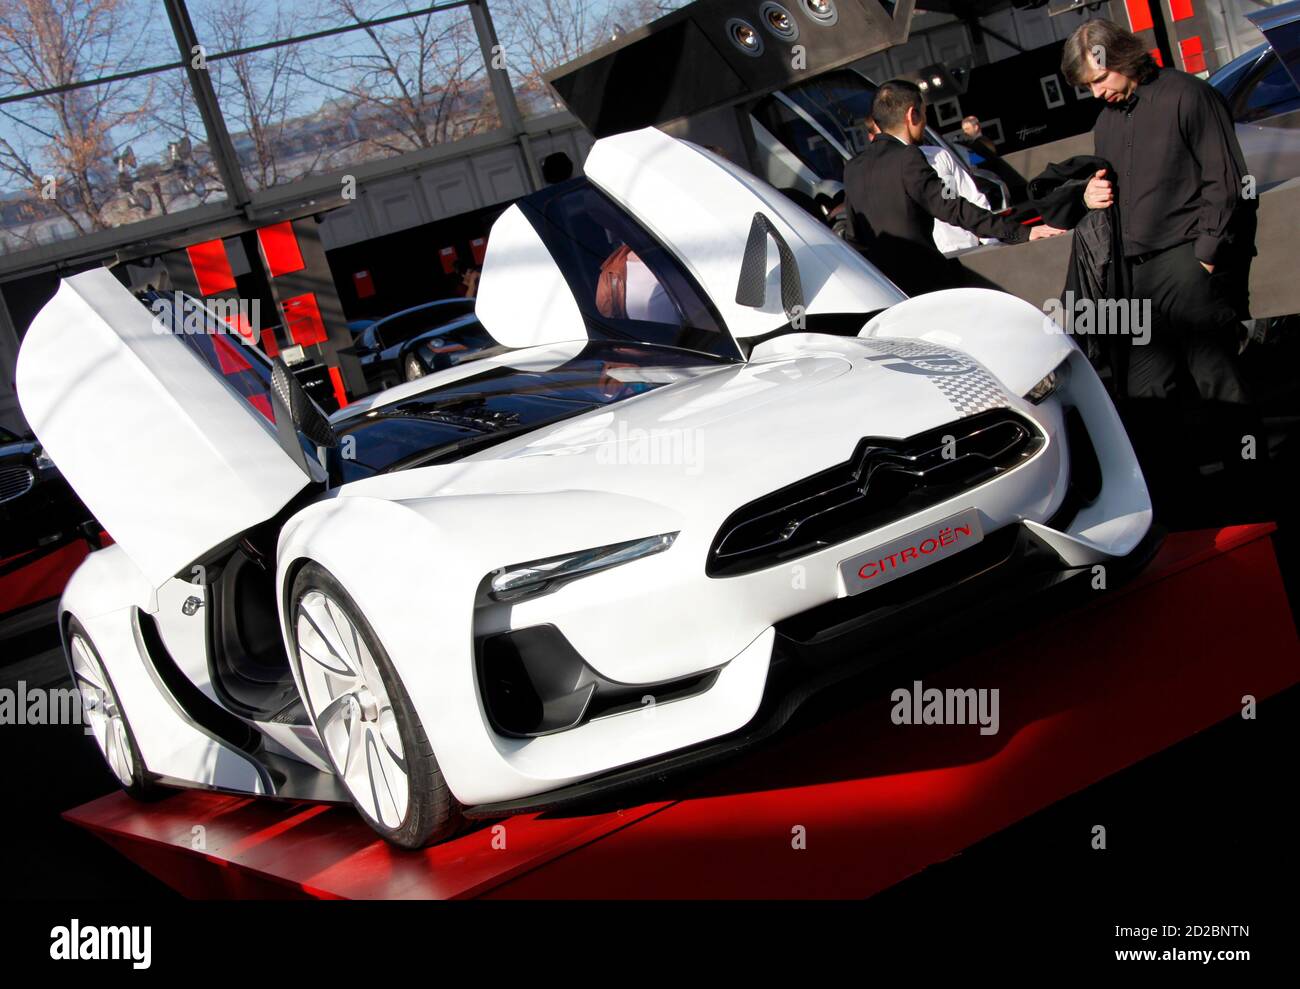 A Citroen Gt Concept Car Is Displayed During The Paris Concept Car Exhibition February 11 09 Reuters Pascal Rossignol France Stock Photo Alamy